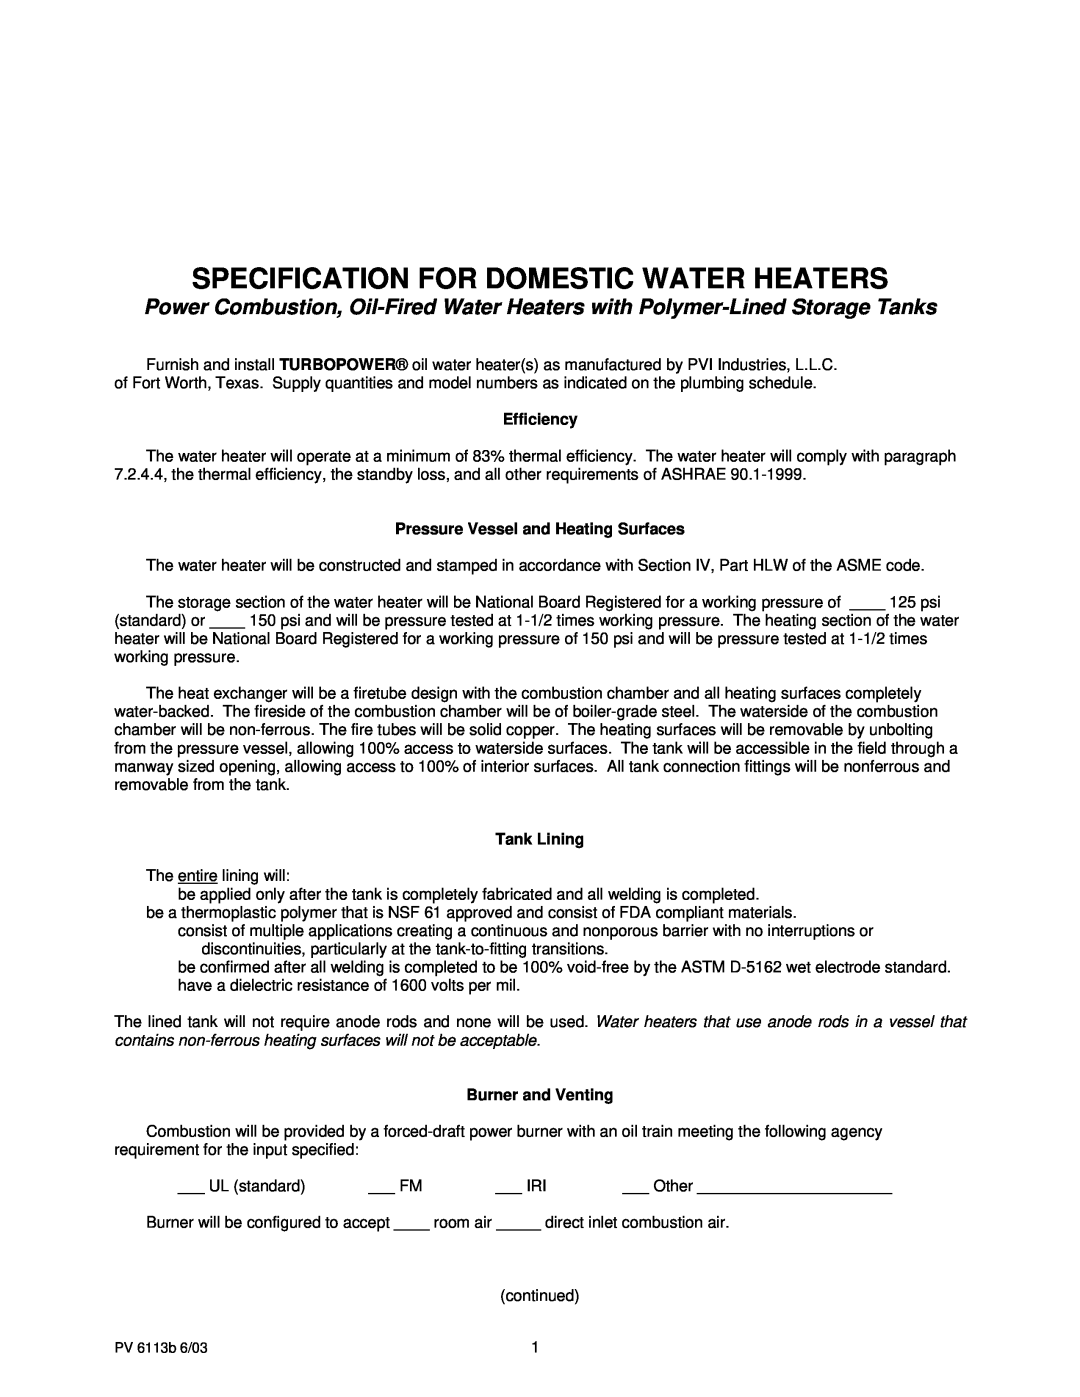 PVI Industries PV 6113b manual Specification For Domestic Water Heaters, Efficiency, Pressure Vessel and Heating Surfaces 